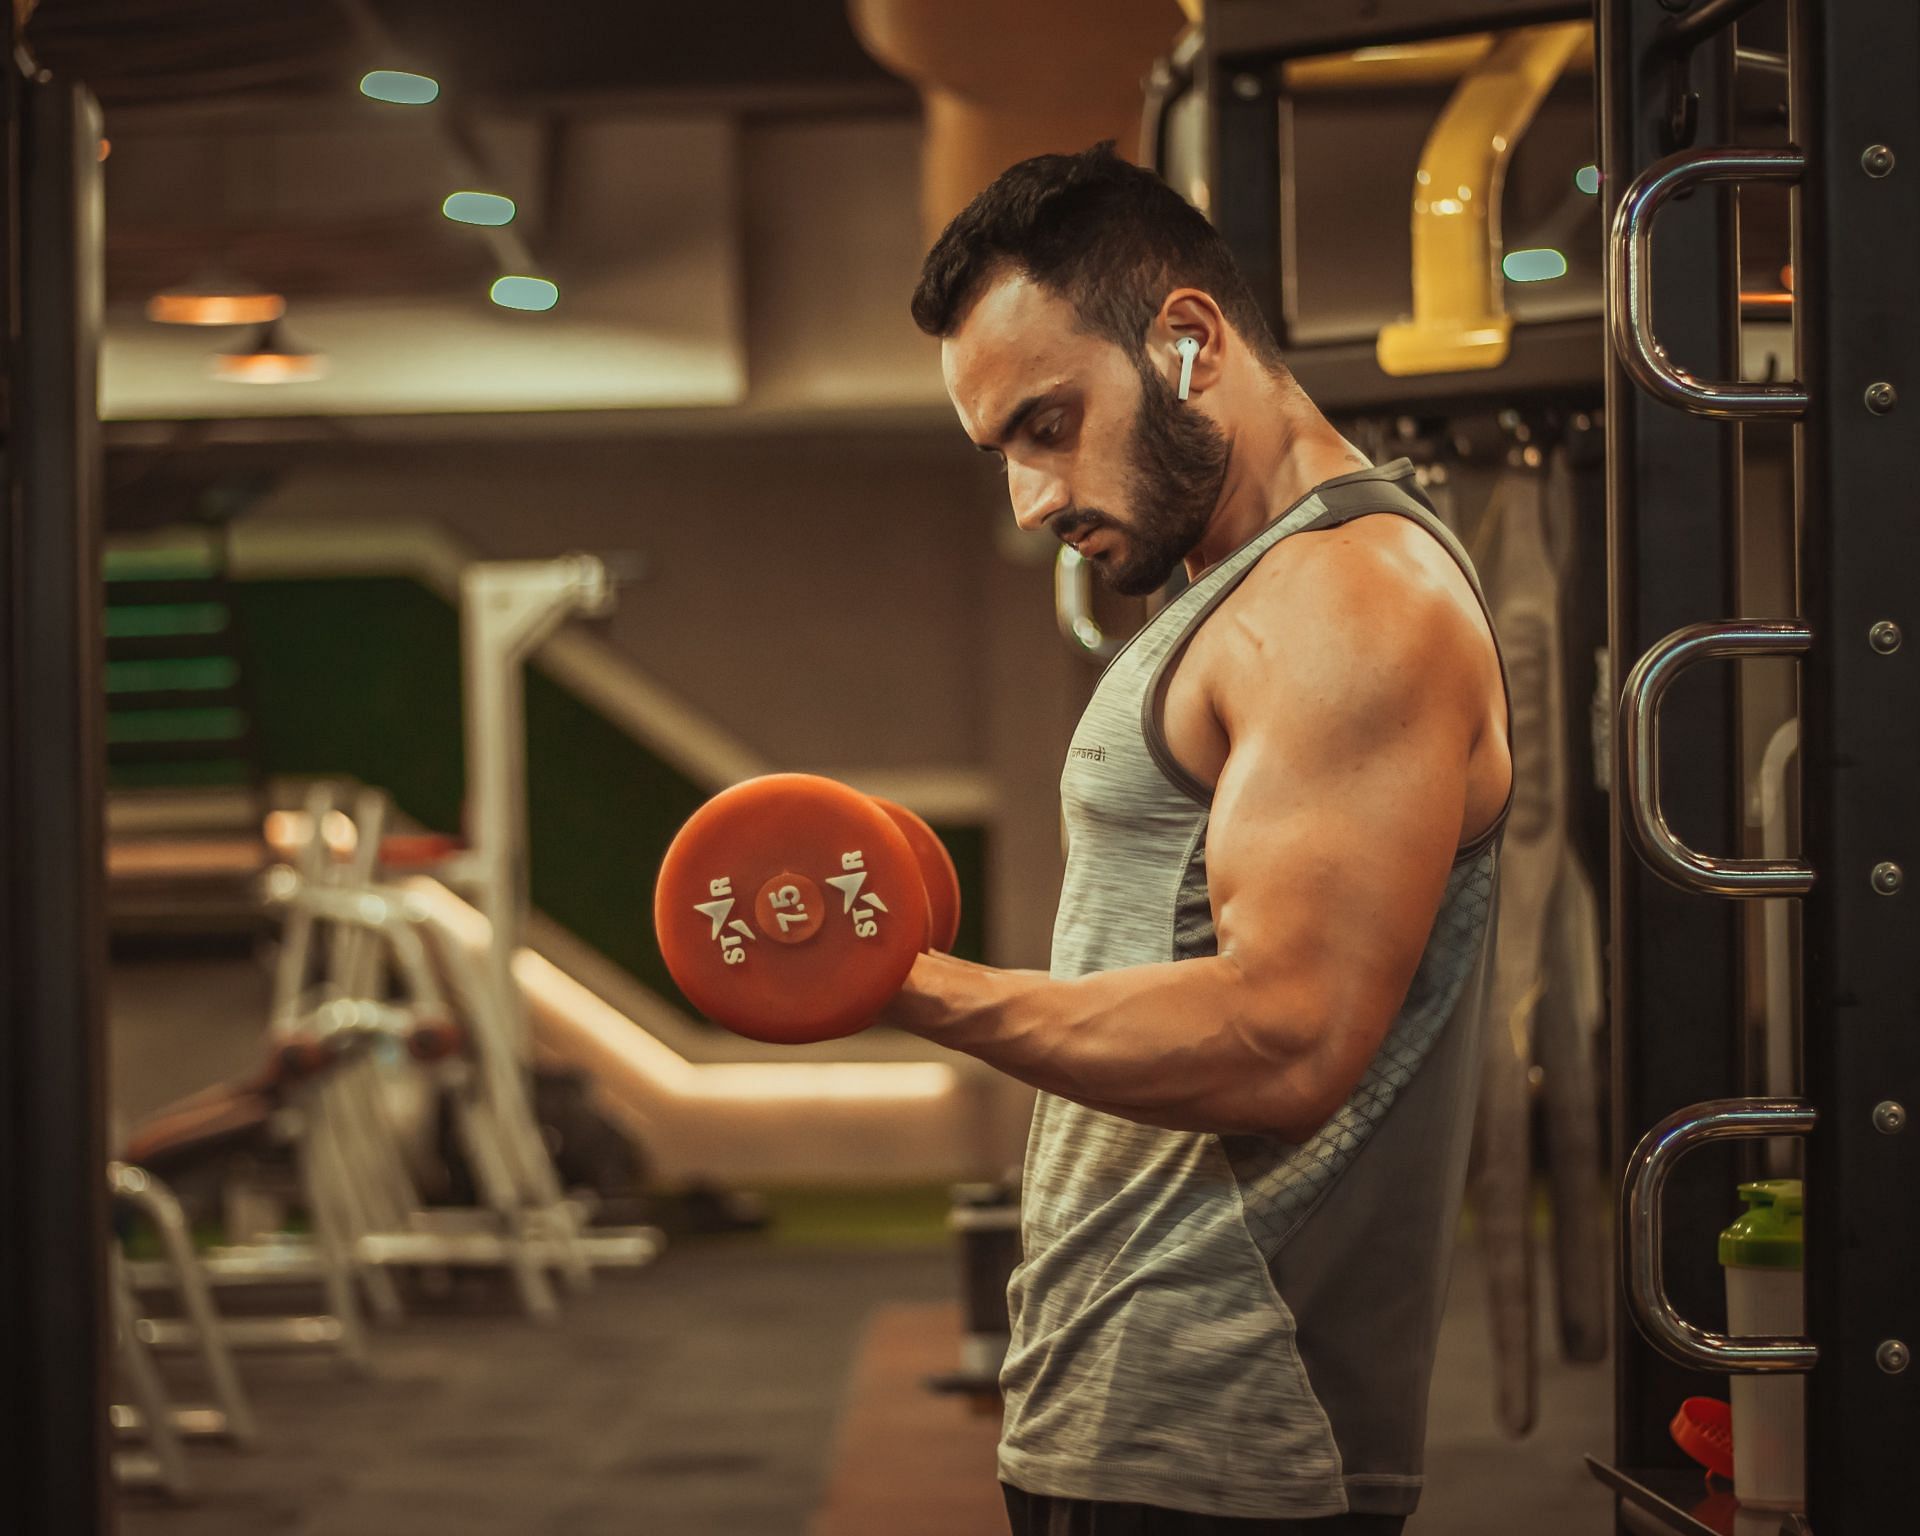 Dumbbell exercises simultaneously activates the muscles of the core, back and shoulders. (Image via Unsplash/ Dollar Gill)